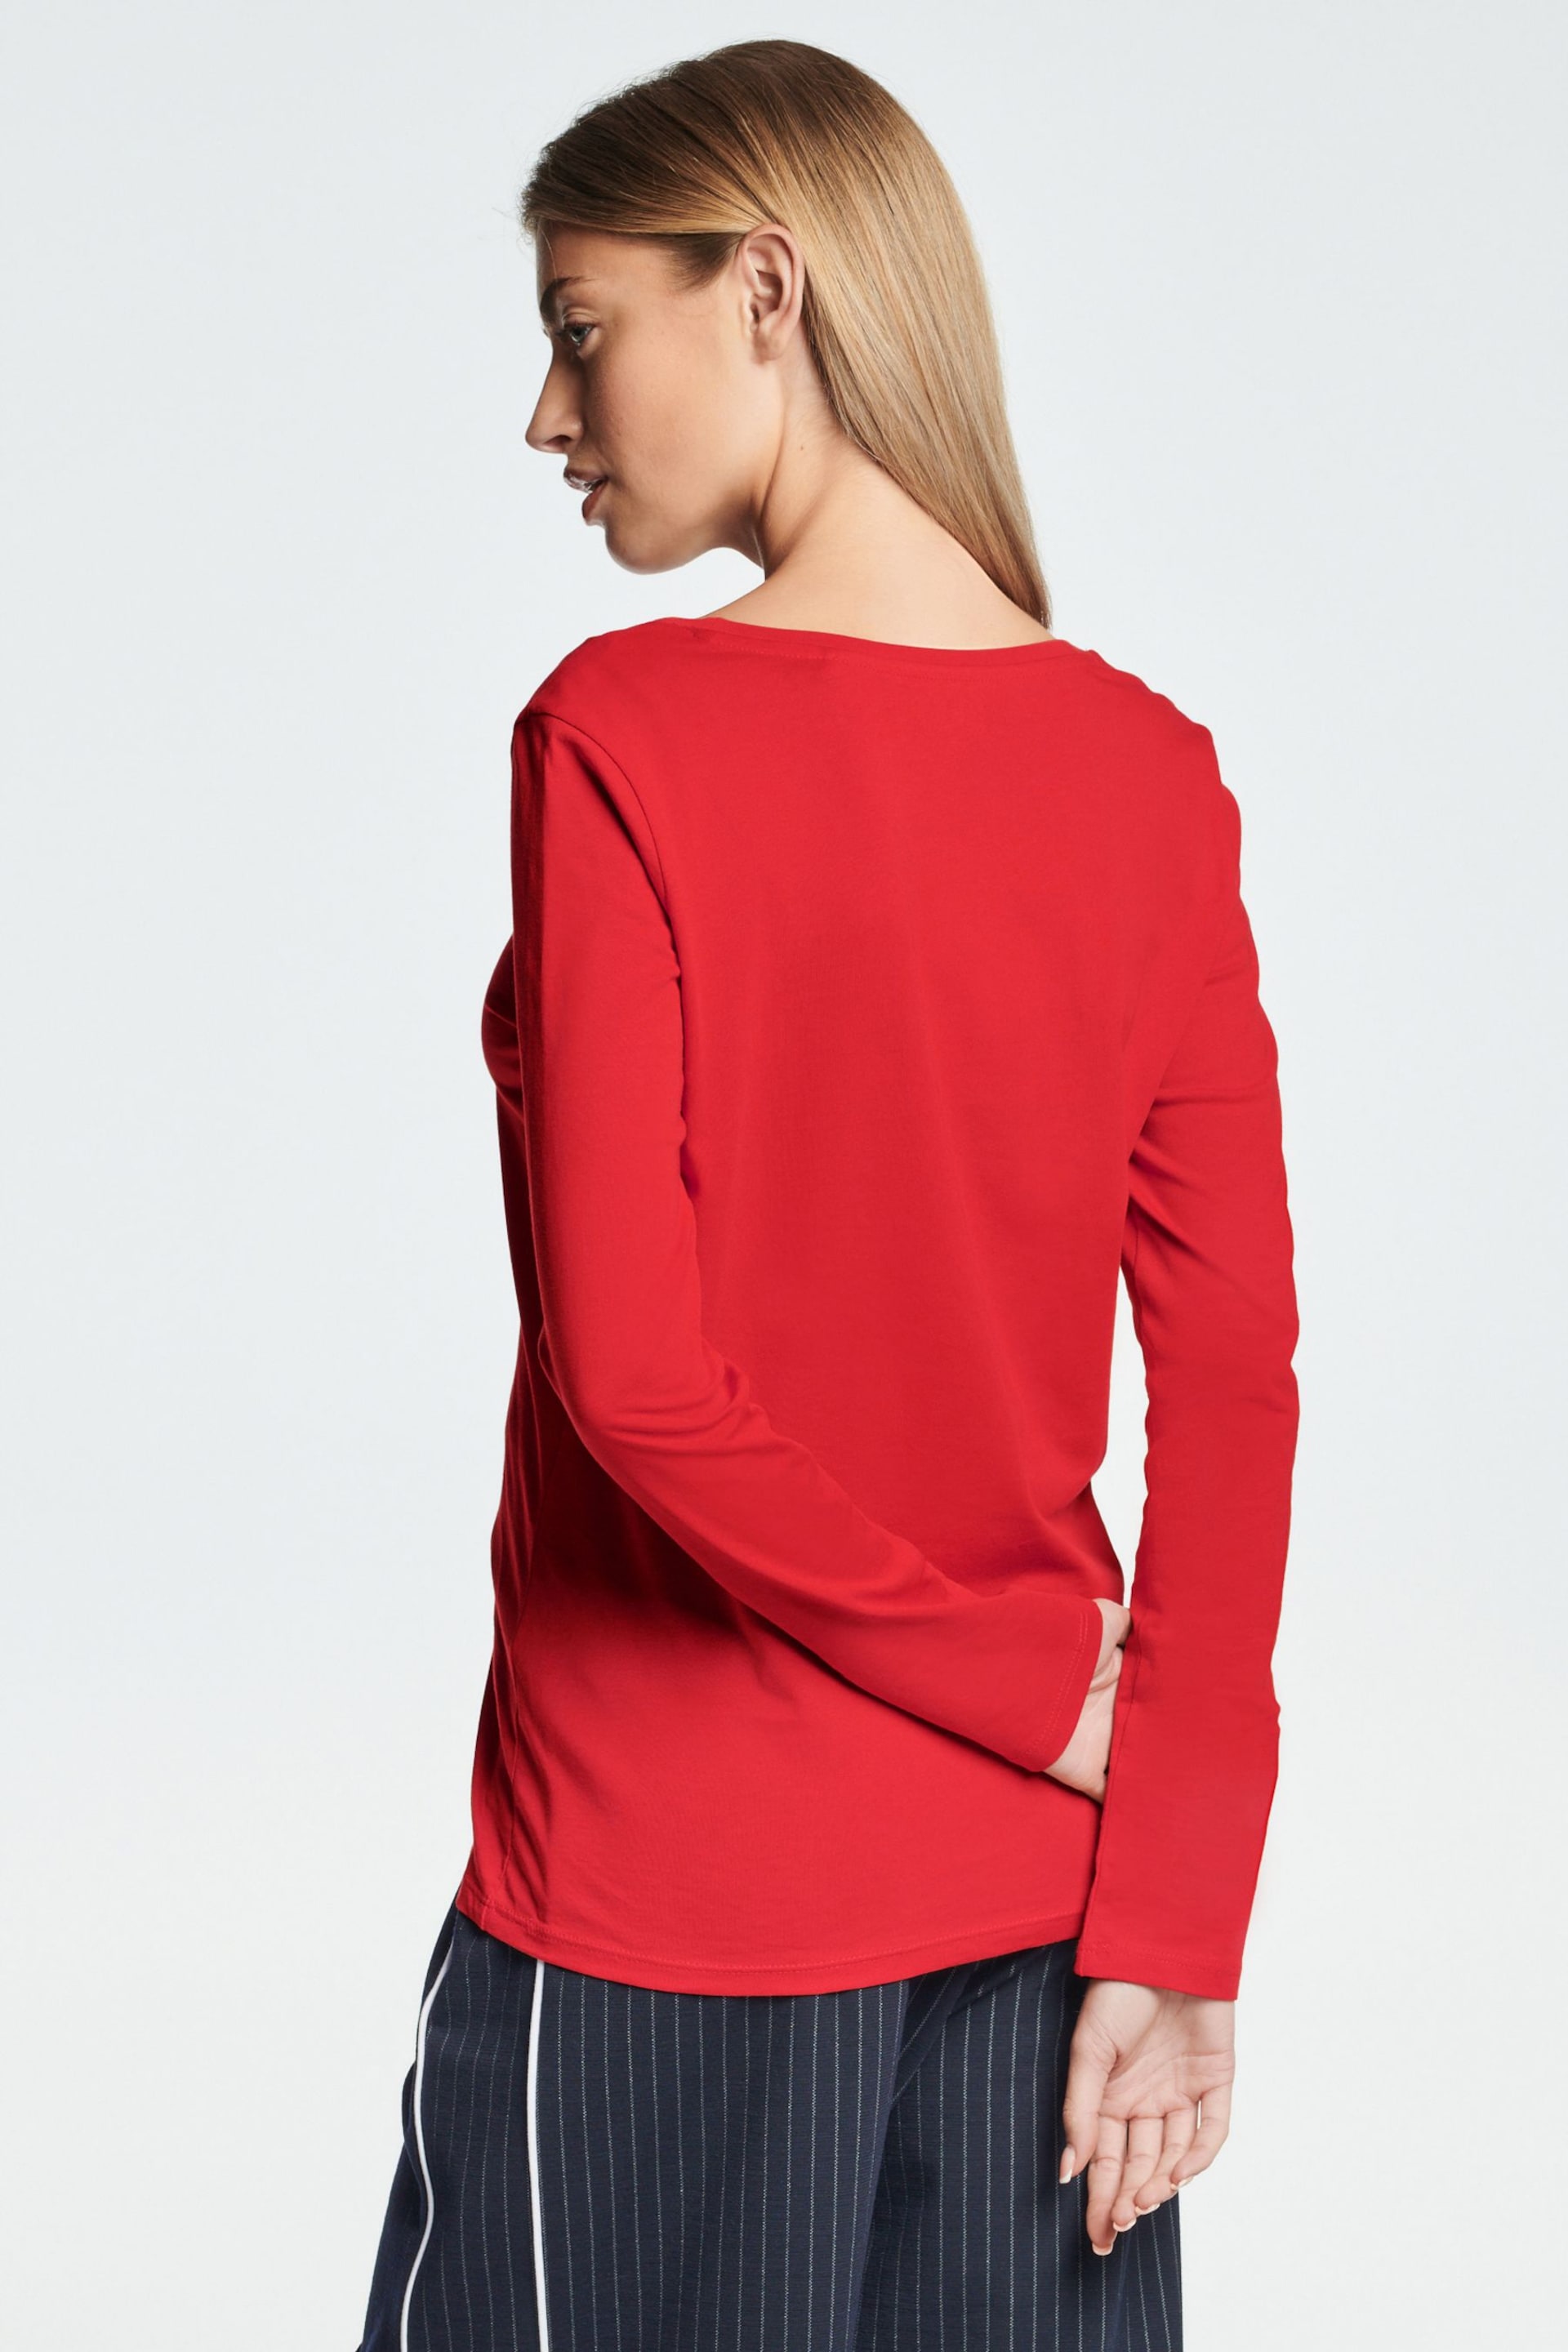 Red Long Sleeve Crew Neck Top - Image 5 of 10